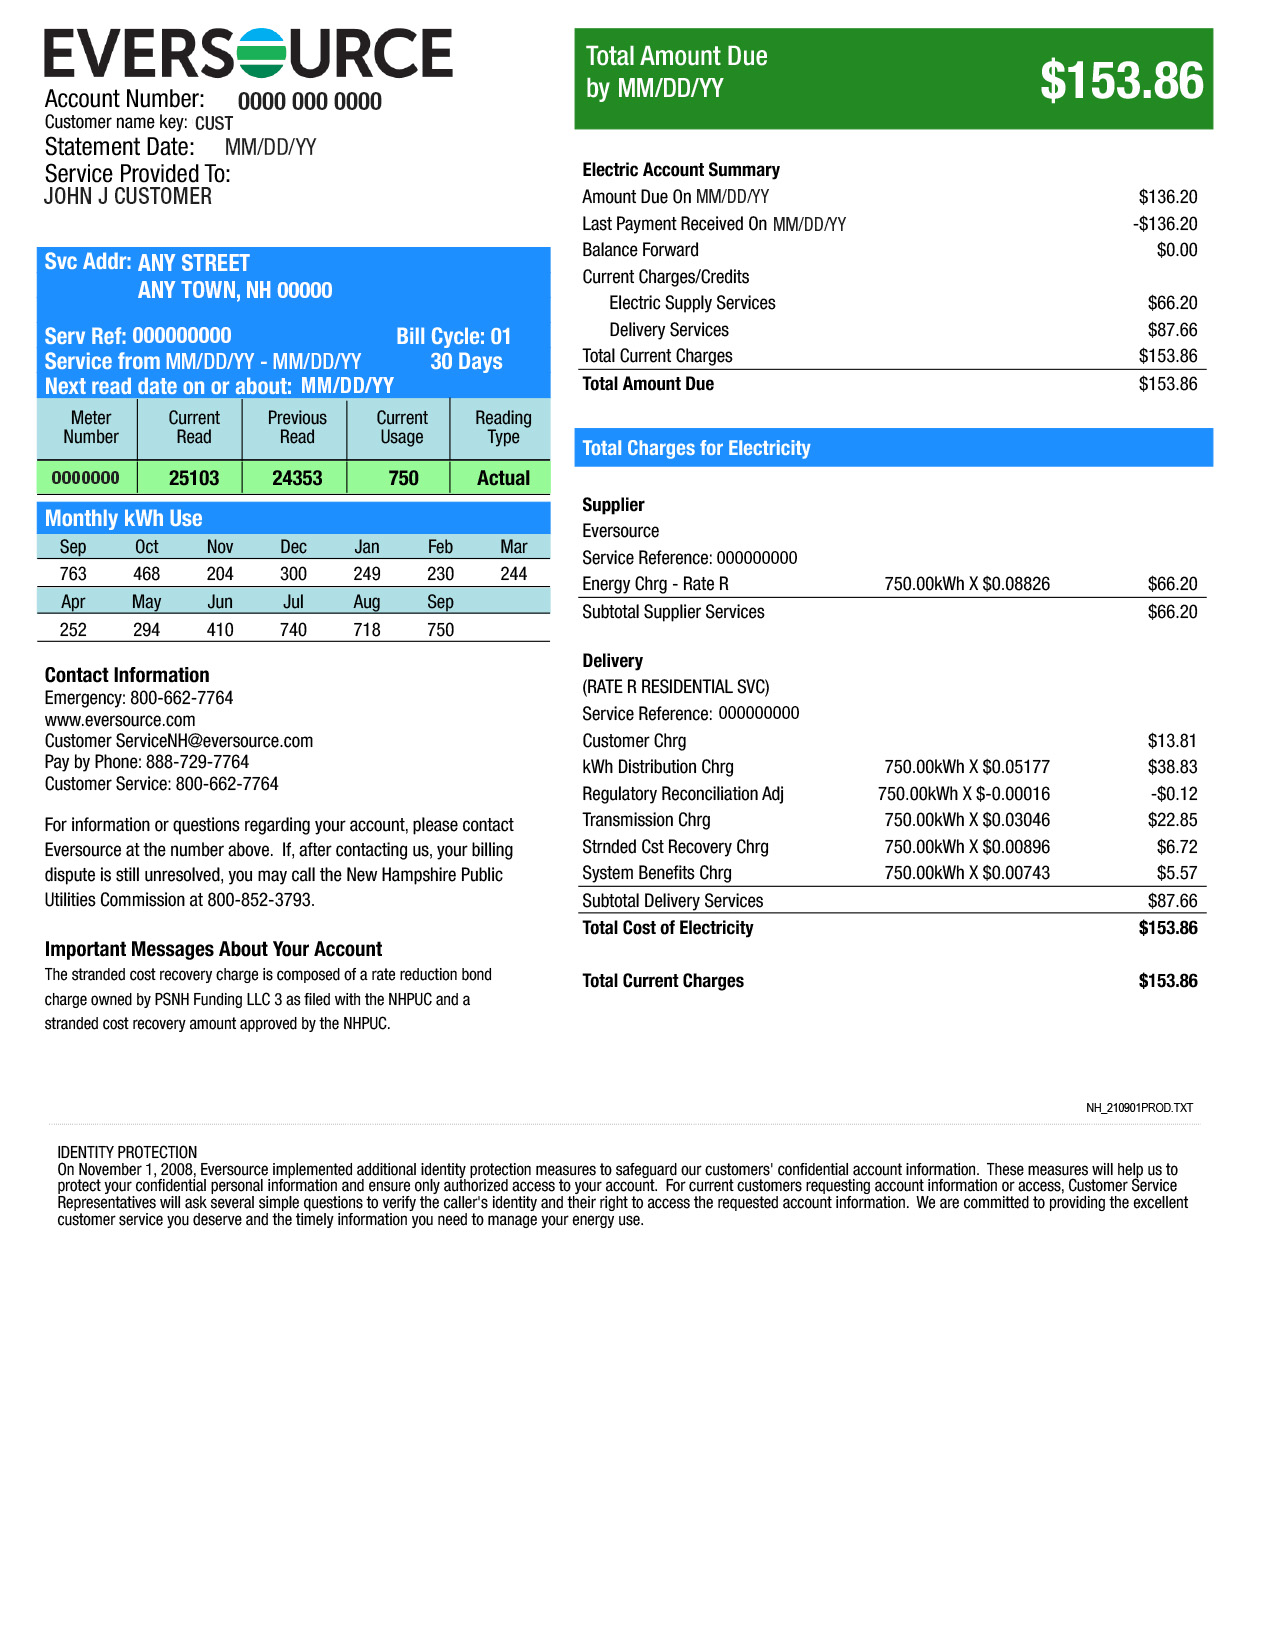 Sample Electric Bill | Eversource - New Hampshire